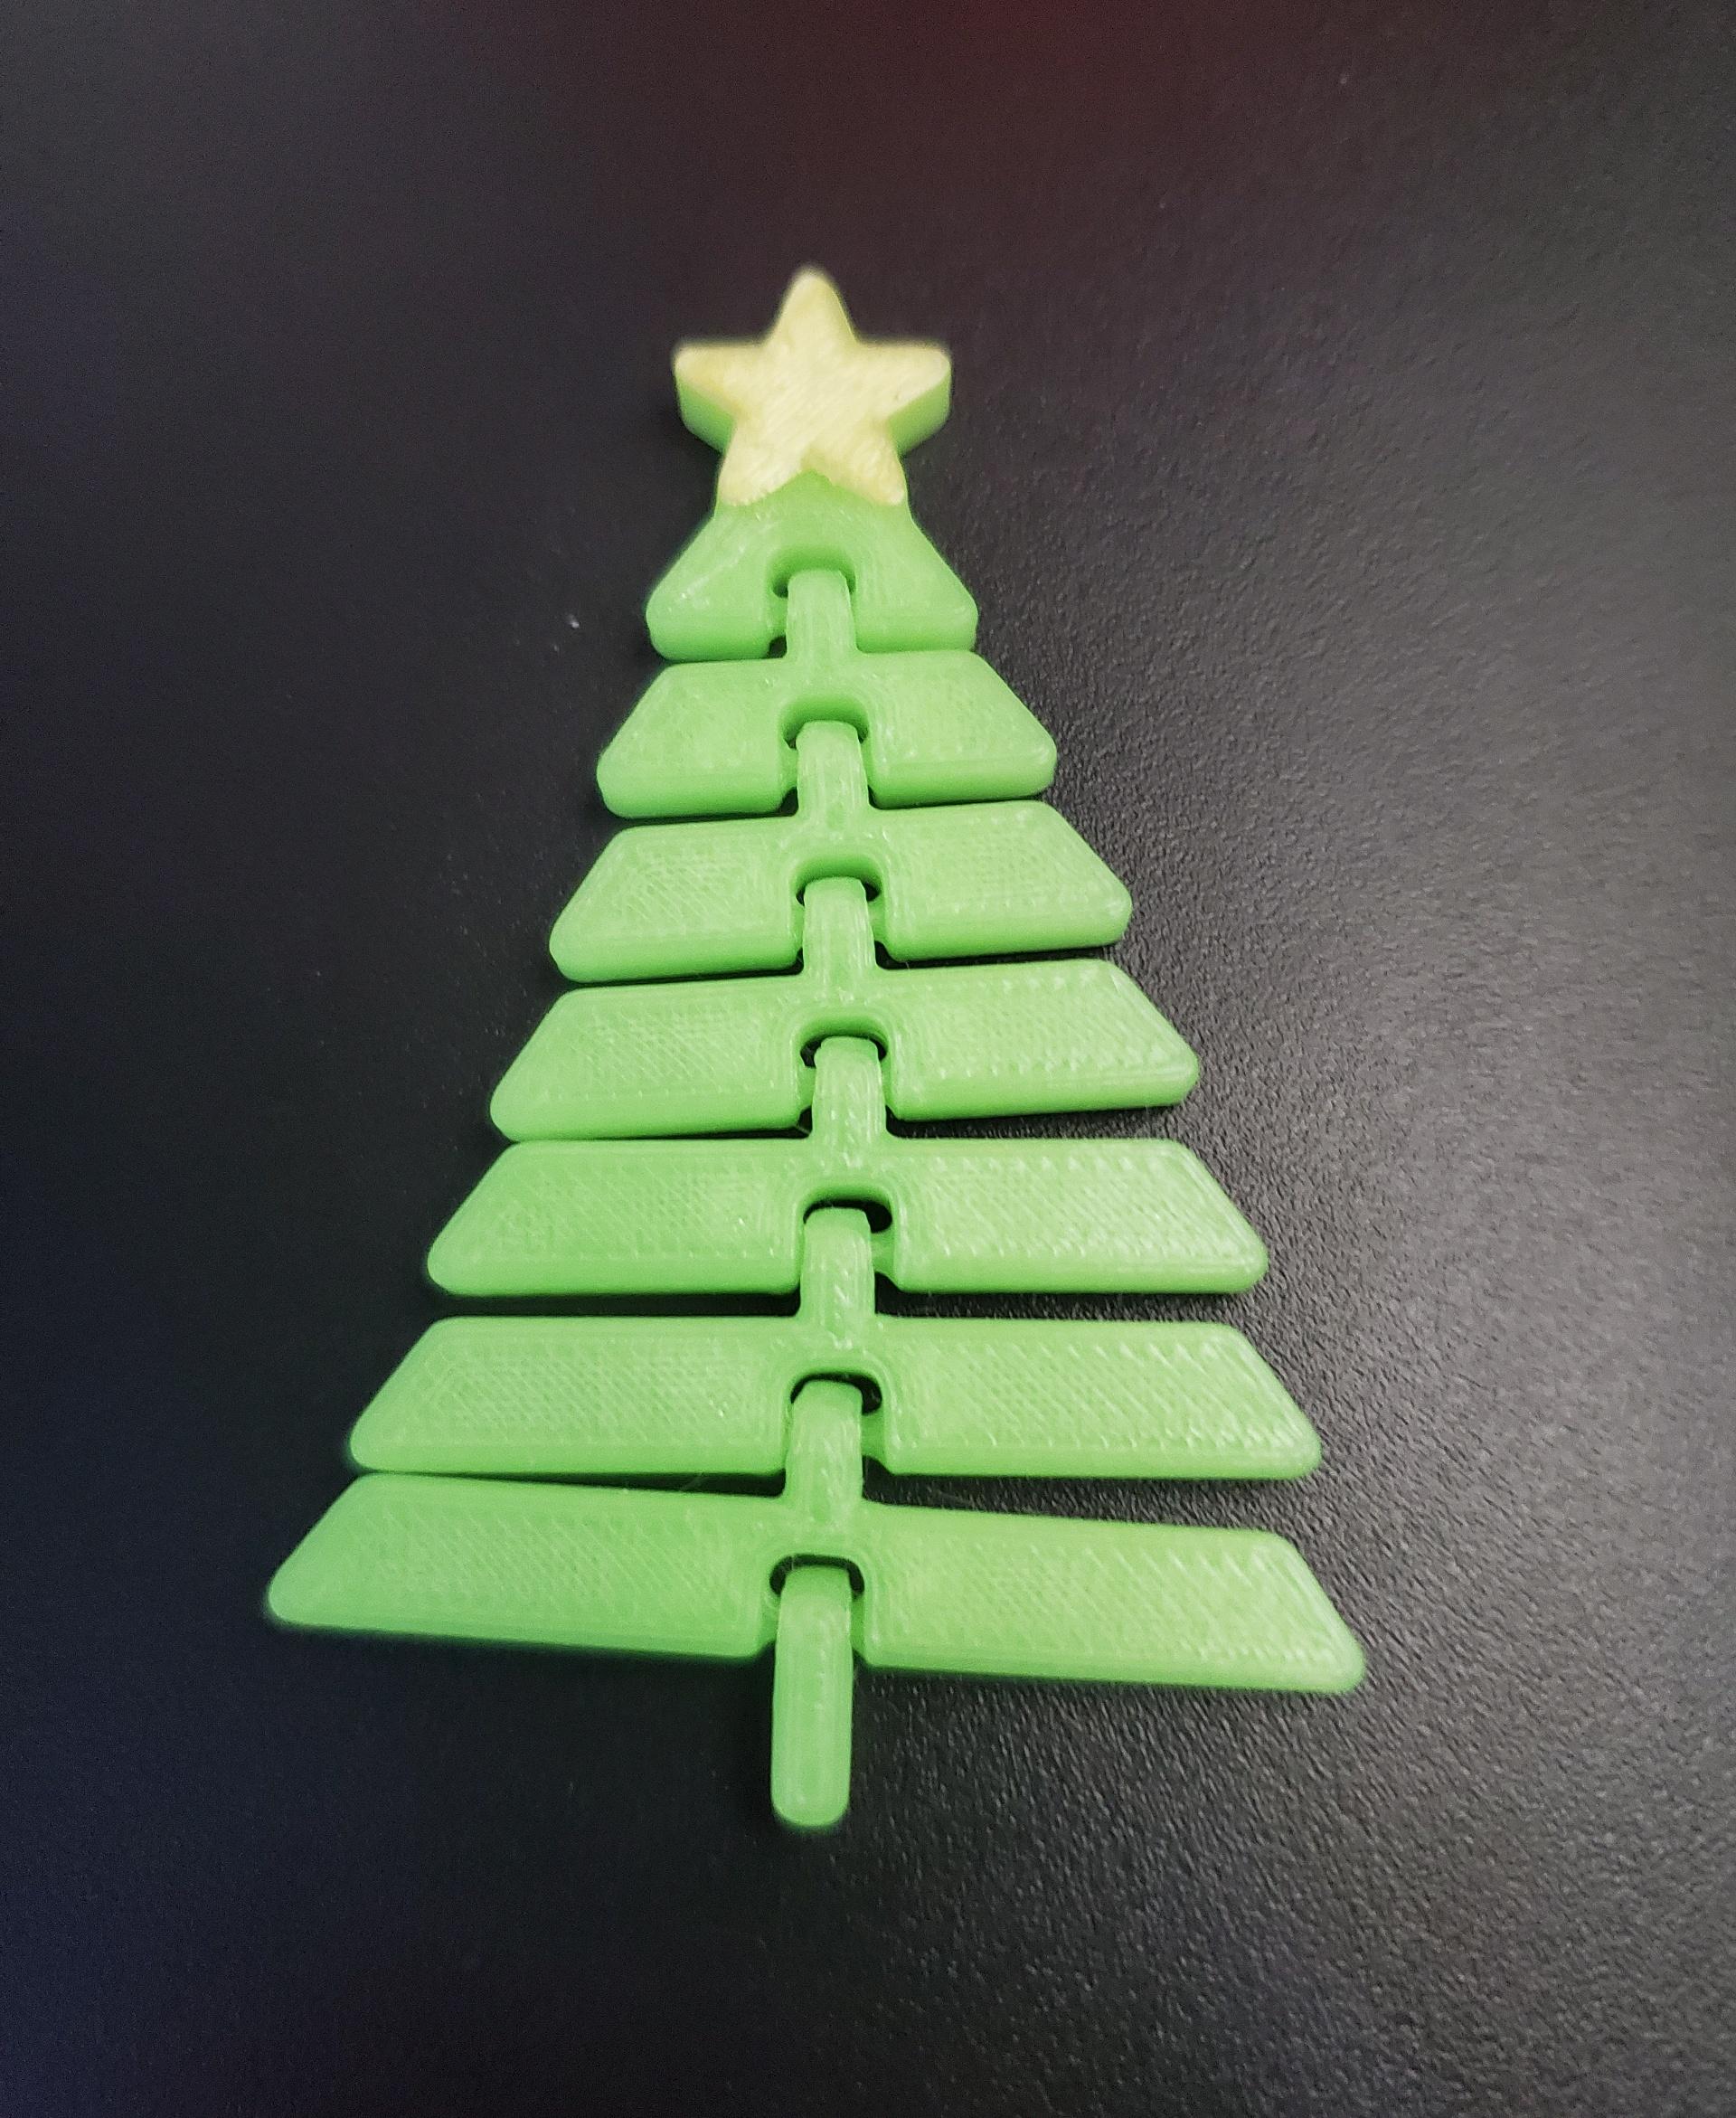 Articulated Christmas Tree with Star - Print in place fidget toy - 3mf - polymaker luminous green - 3d model